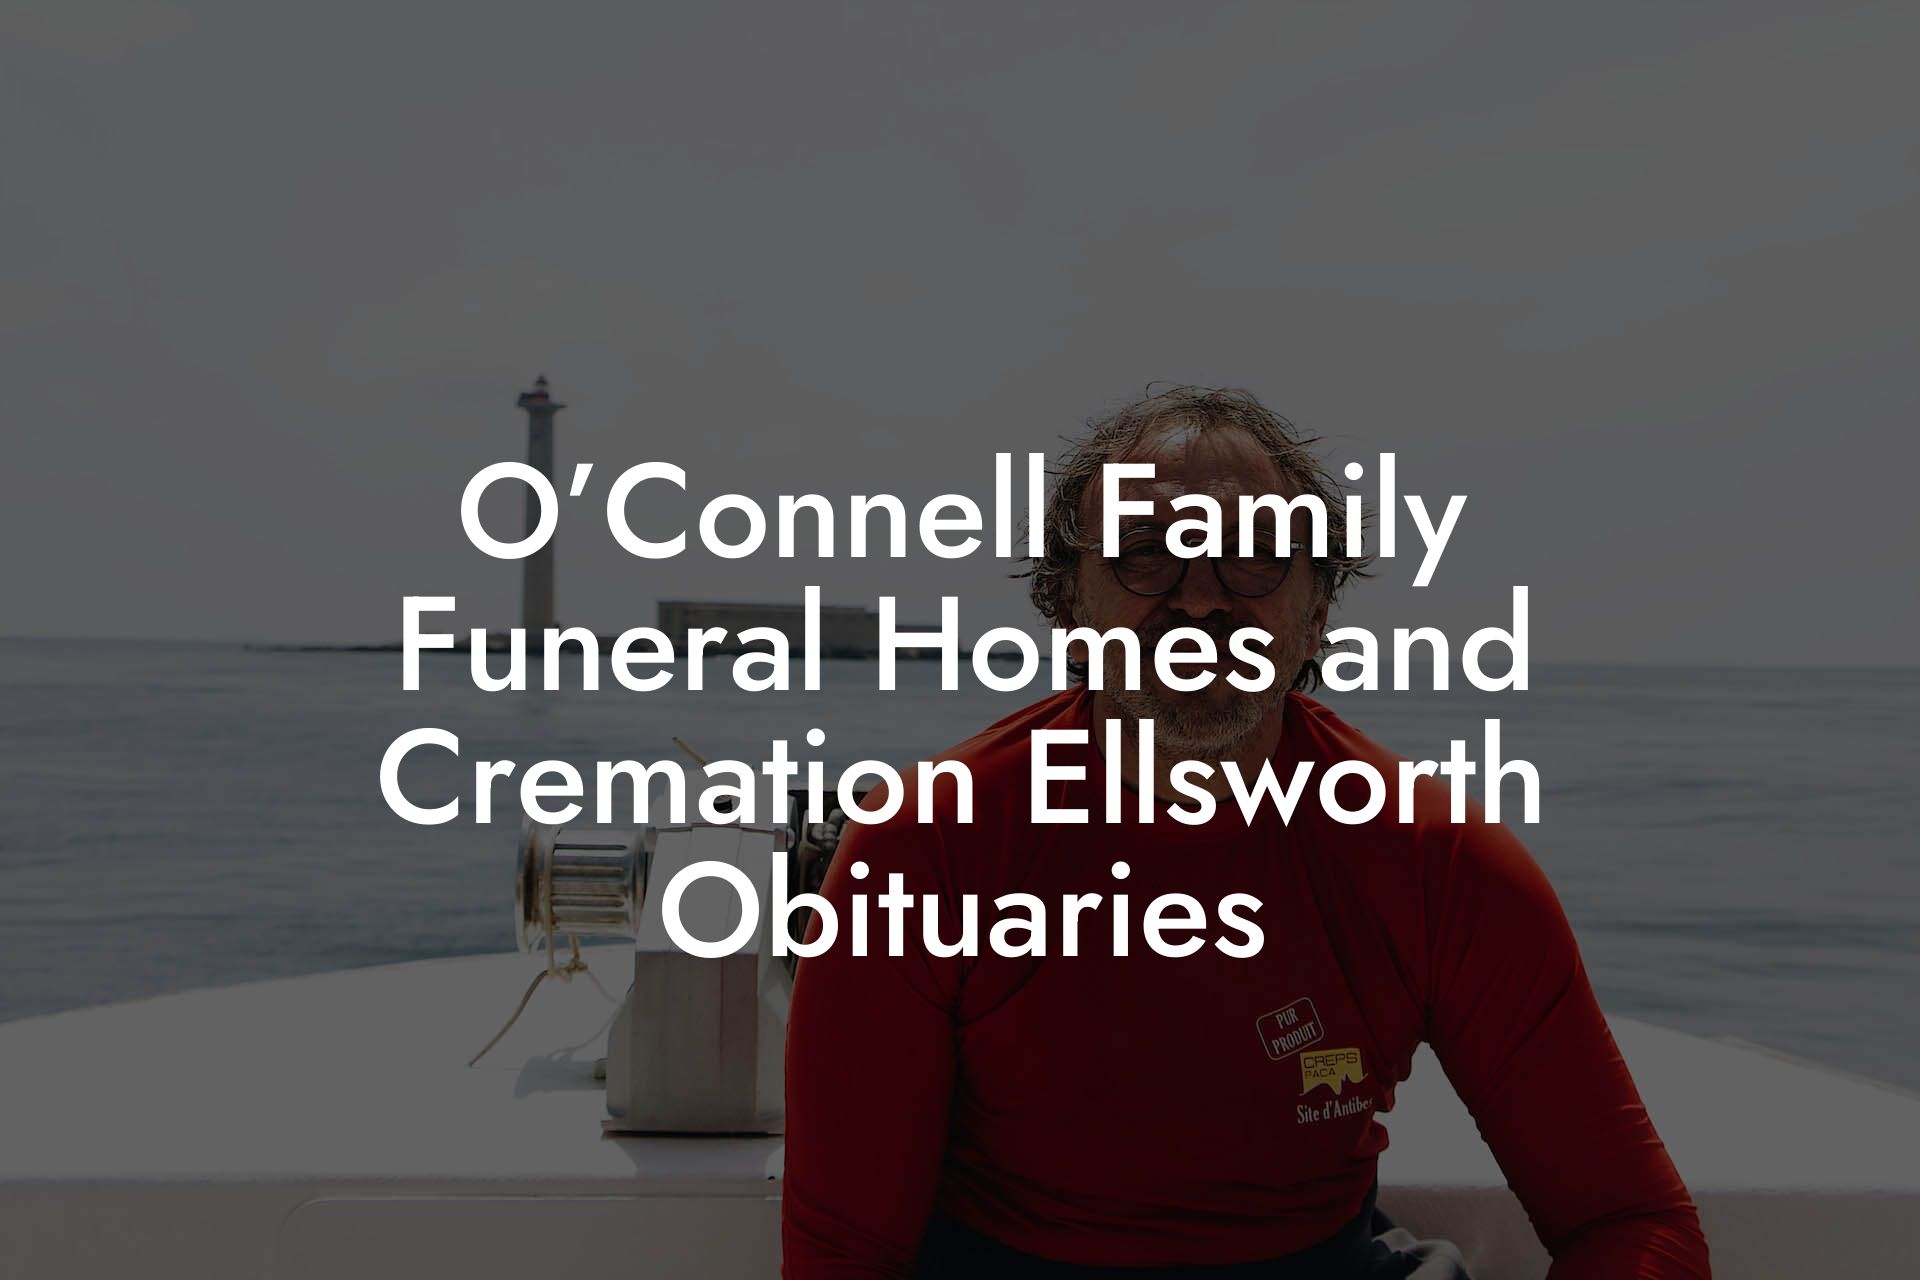 O’Connell Family Funeral Homes and Cremation Ellsworth Obituaries